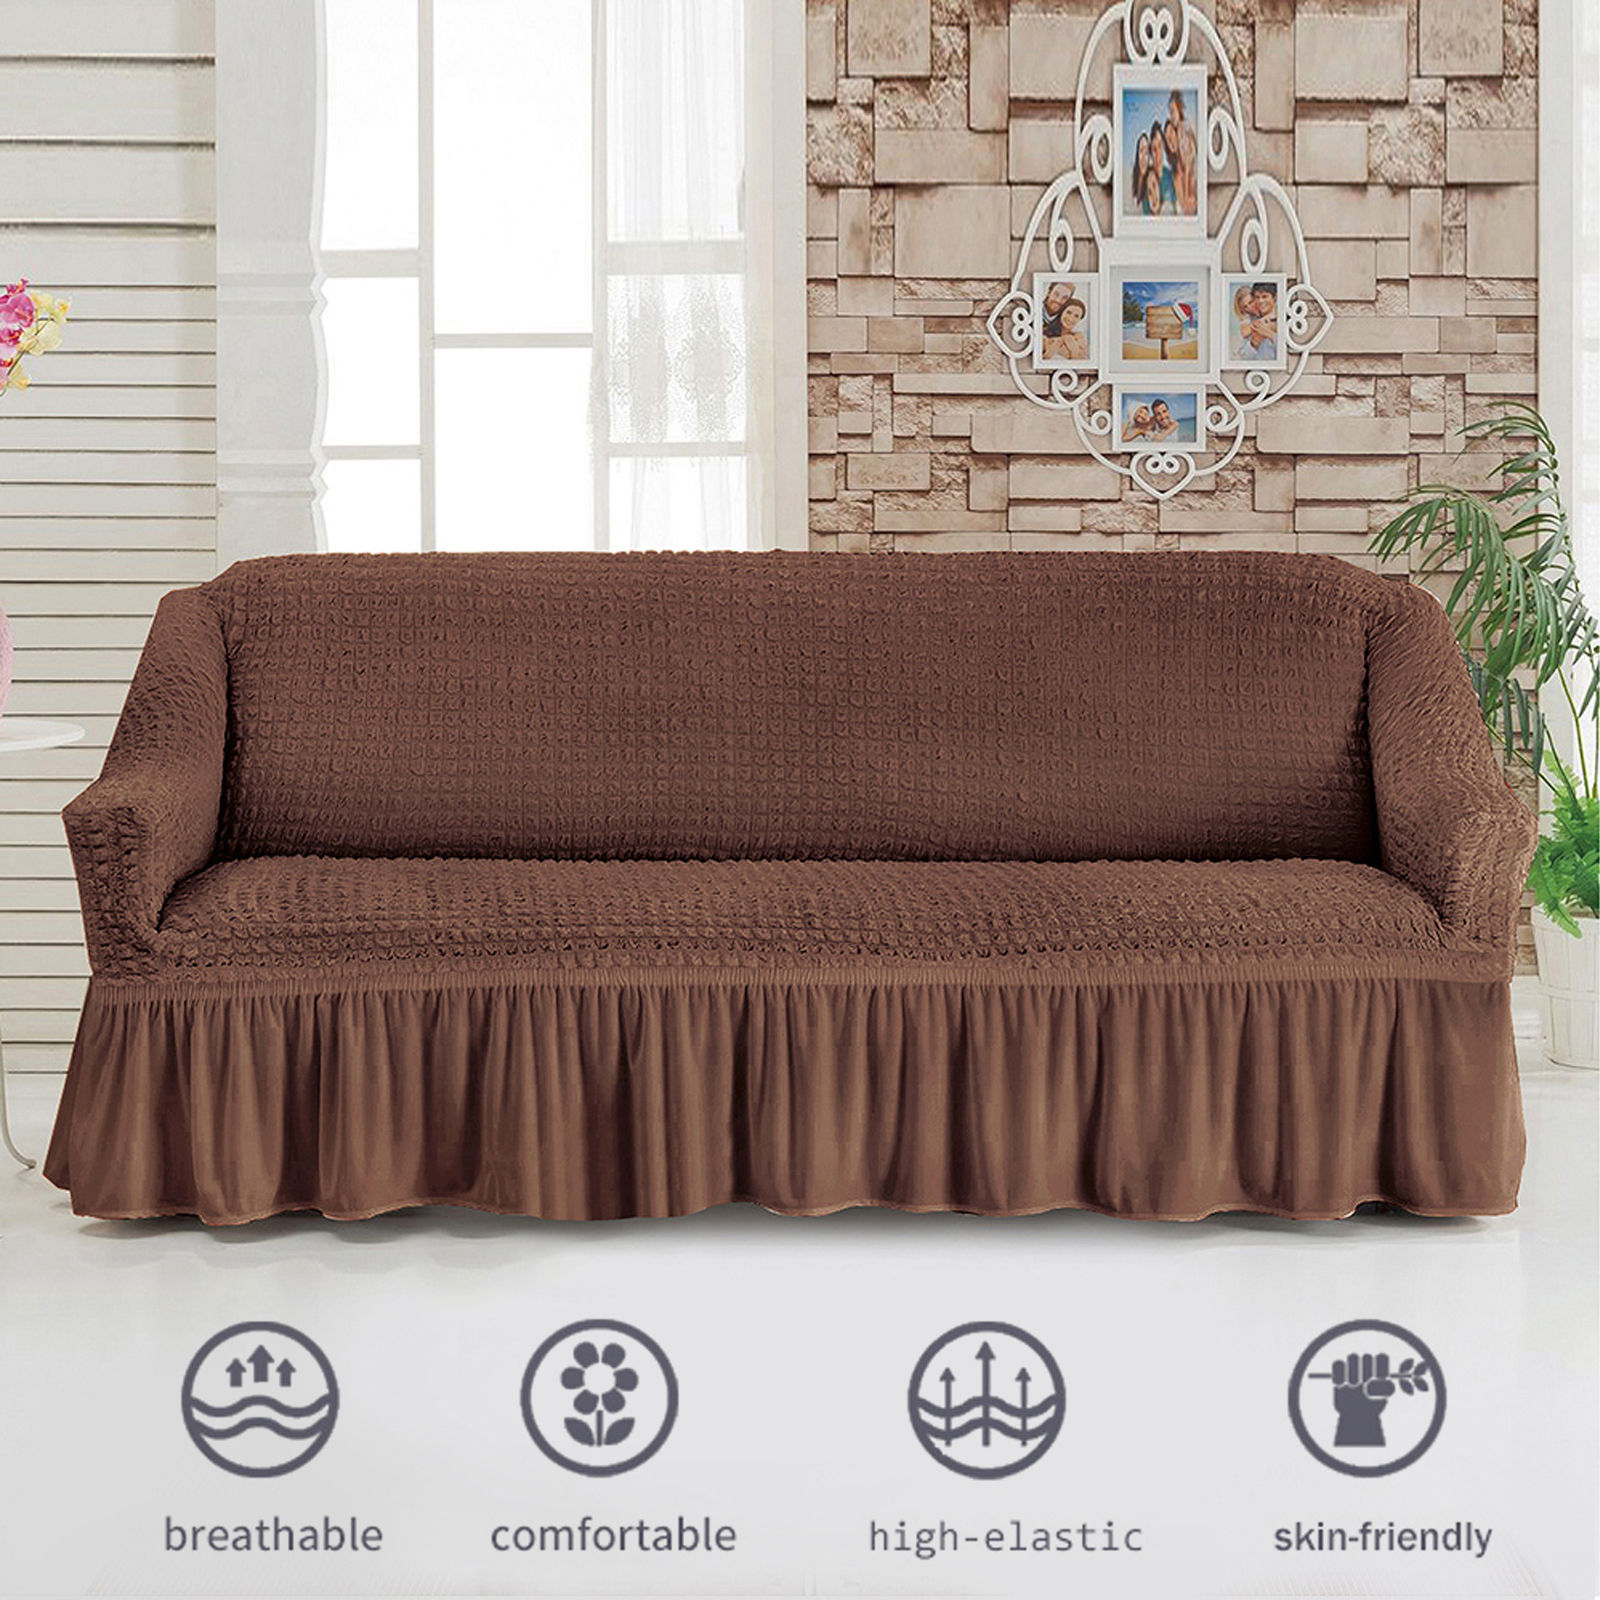 Stretch Sofa Slipcover, 3 Seater Sofa Slipcovers With Skirt With Armless Soft Sofa Cover Elastic Straps Sofa Slipcover For Living Room Kids Pets-Brown B-Medium